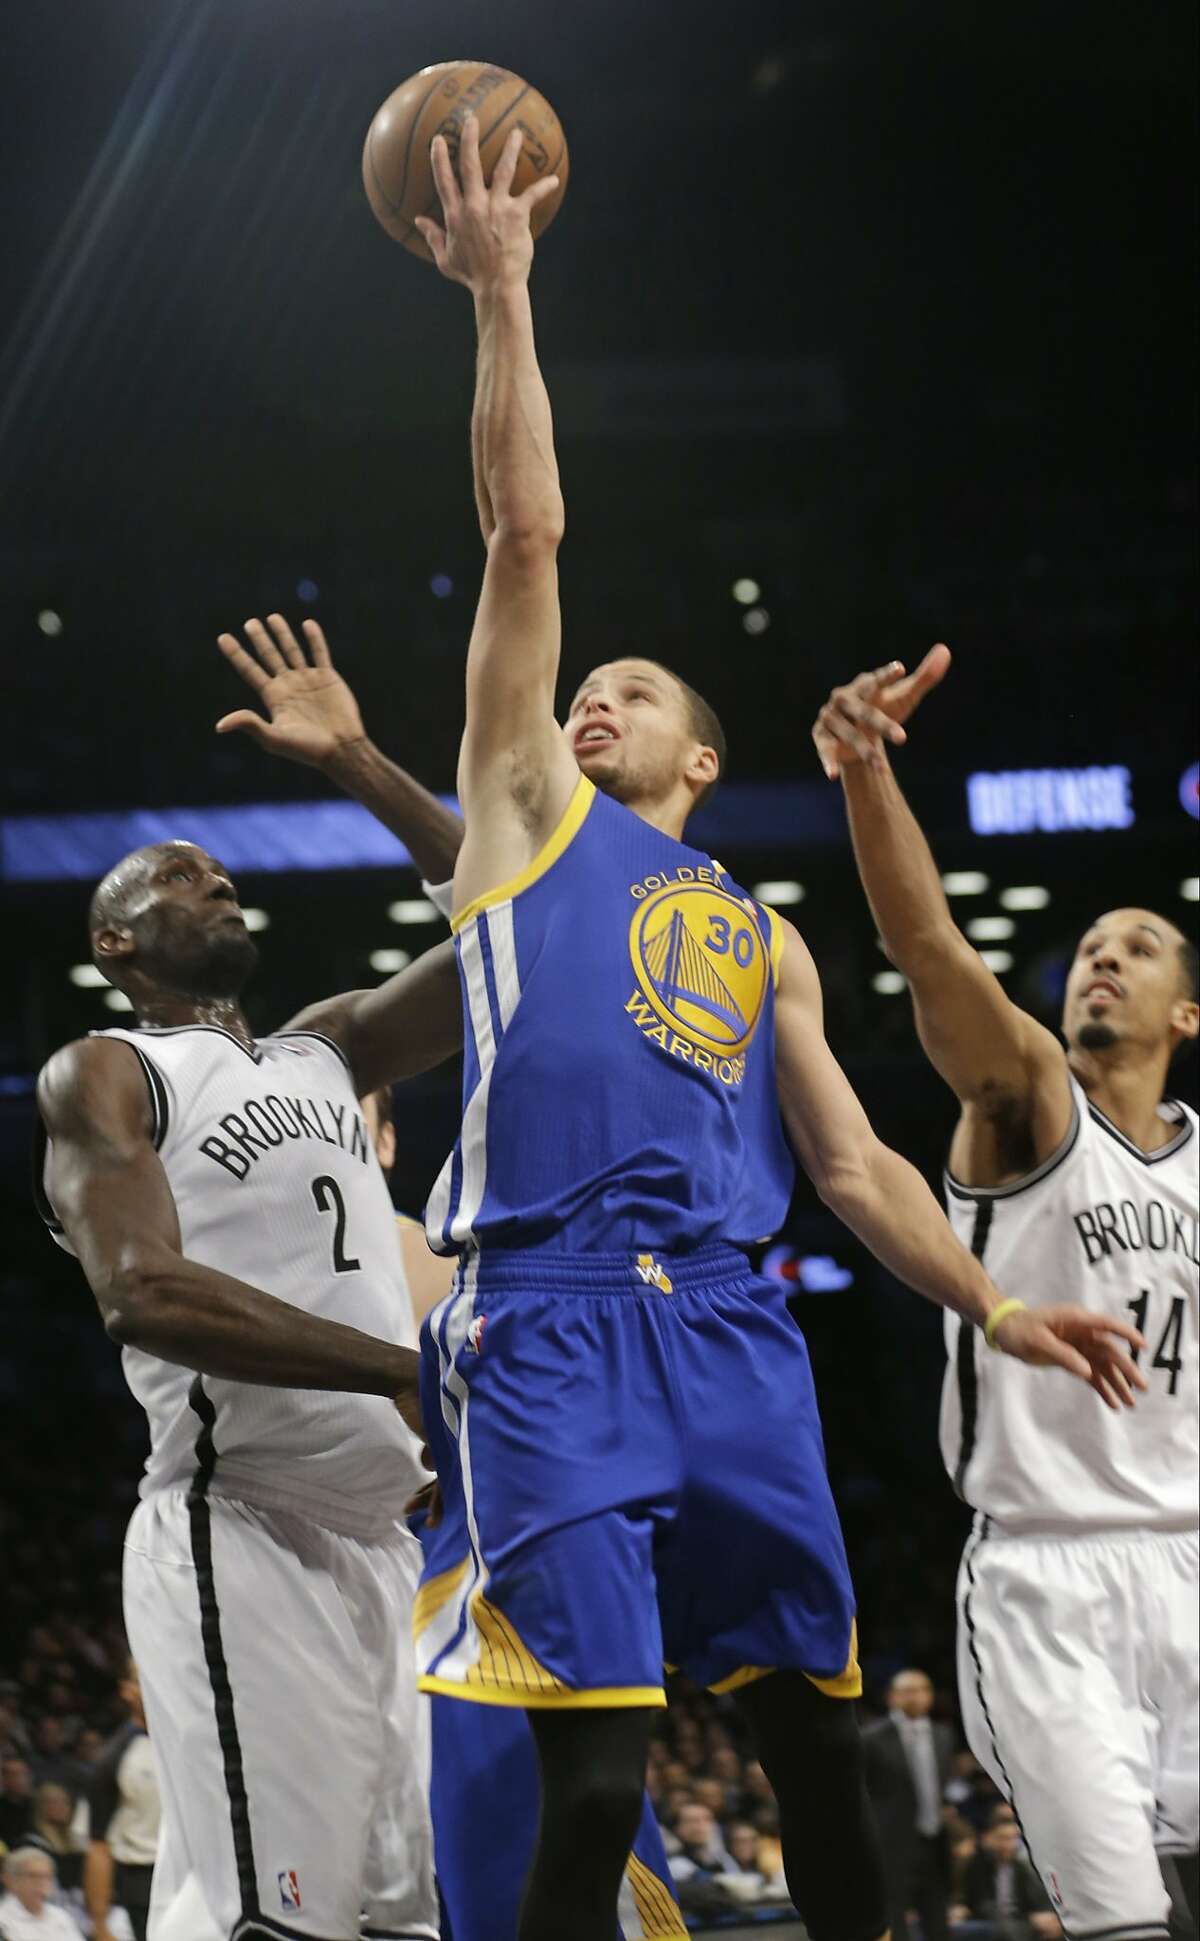 Golden State Warriors' Stephen Curry (30) drives past Brooklyn Nets' Kevin Garnett (2) and Shaun Livingston (14) during the first half of an NBA basketball game Wednesday, Jan. 8, 2014, in New York. The Nets won the game 102-98. (AP Photo/Frank Franklin II)